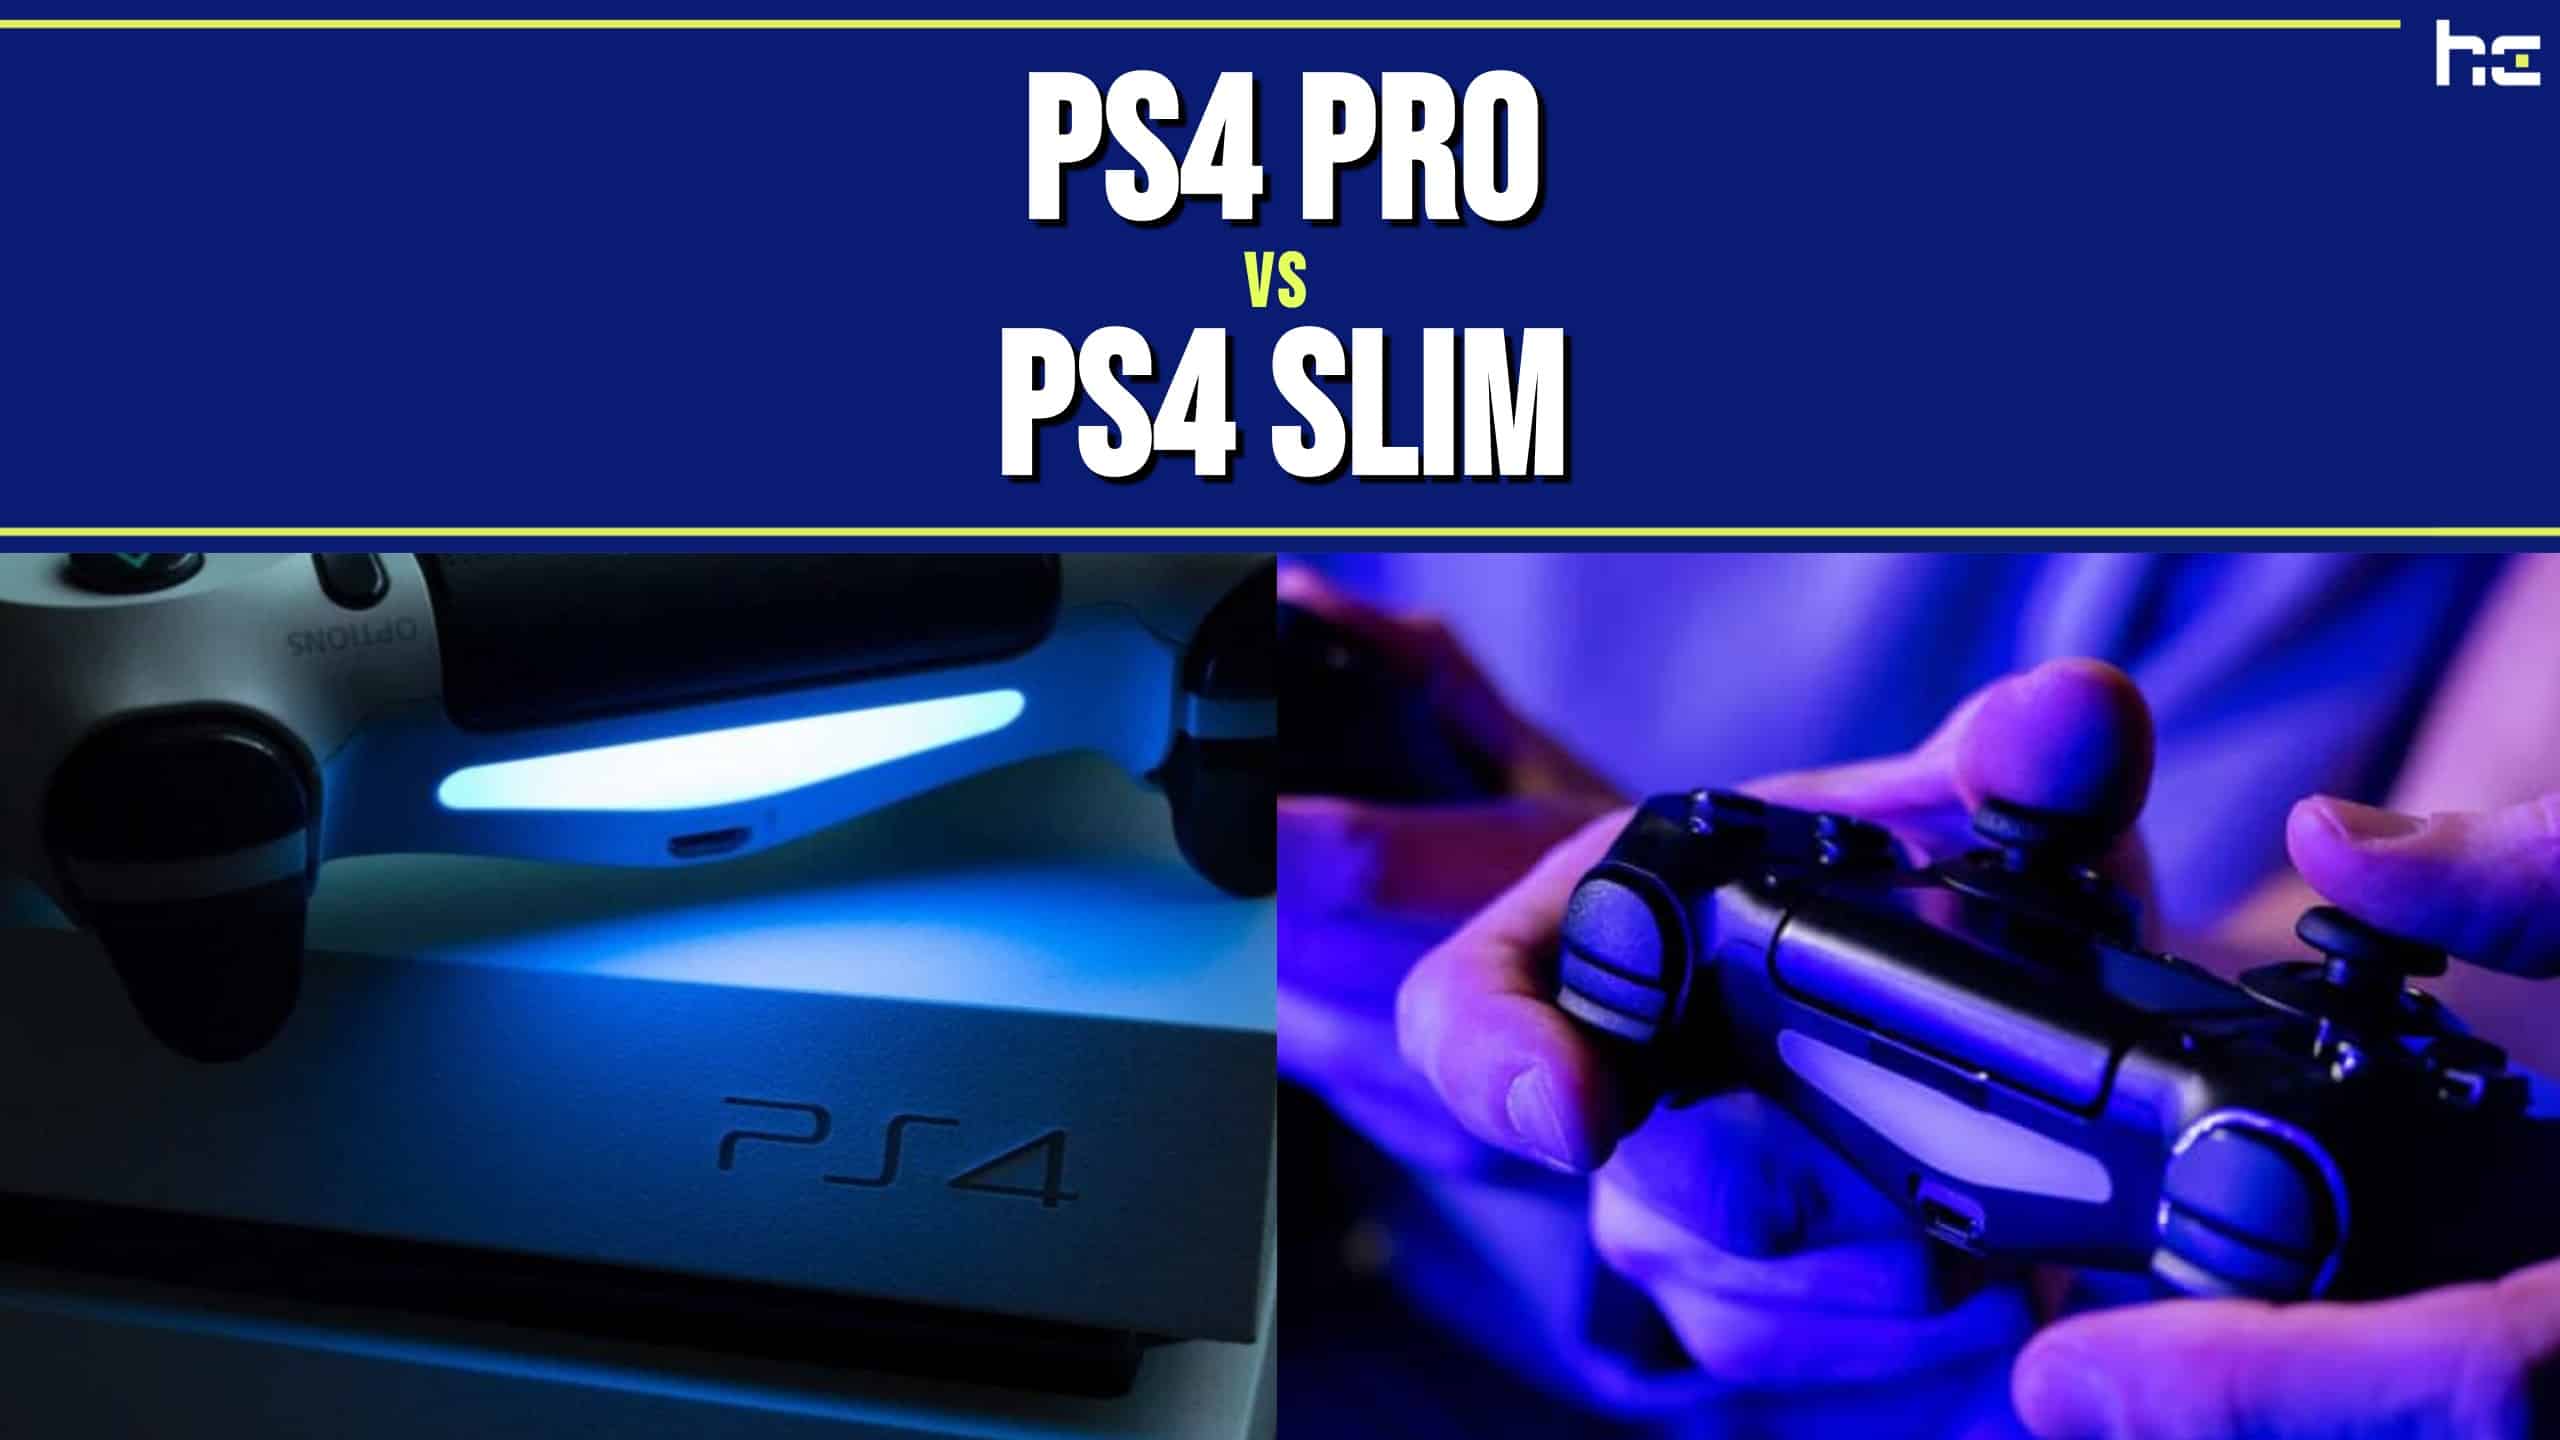 PS4 Pro Review: Still worth a purchase?